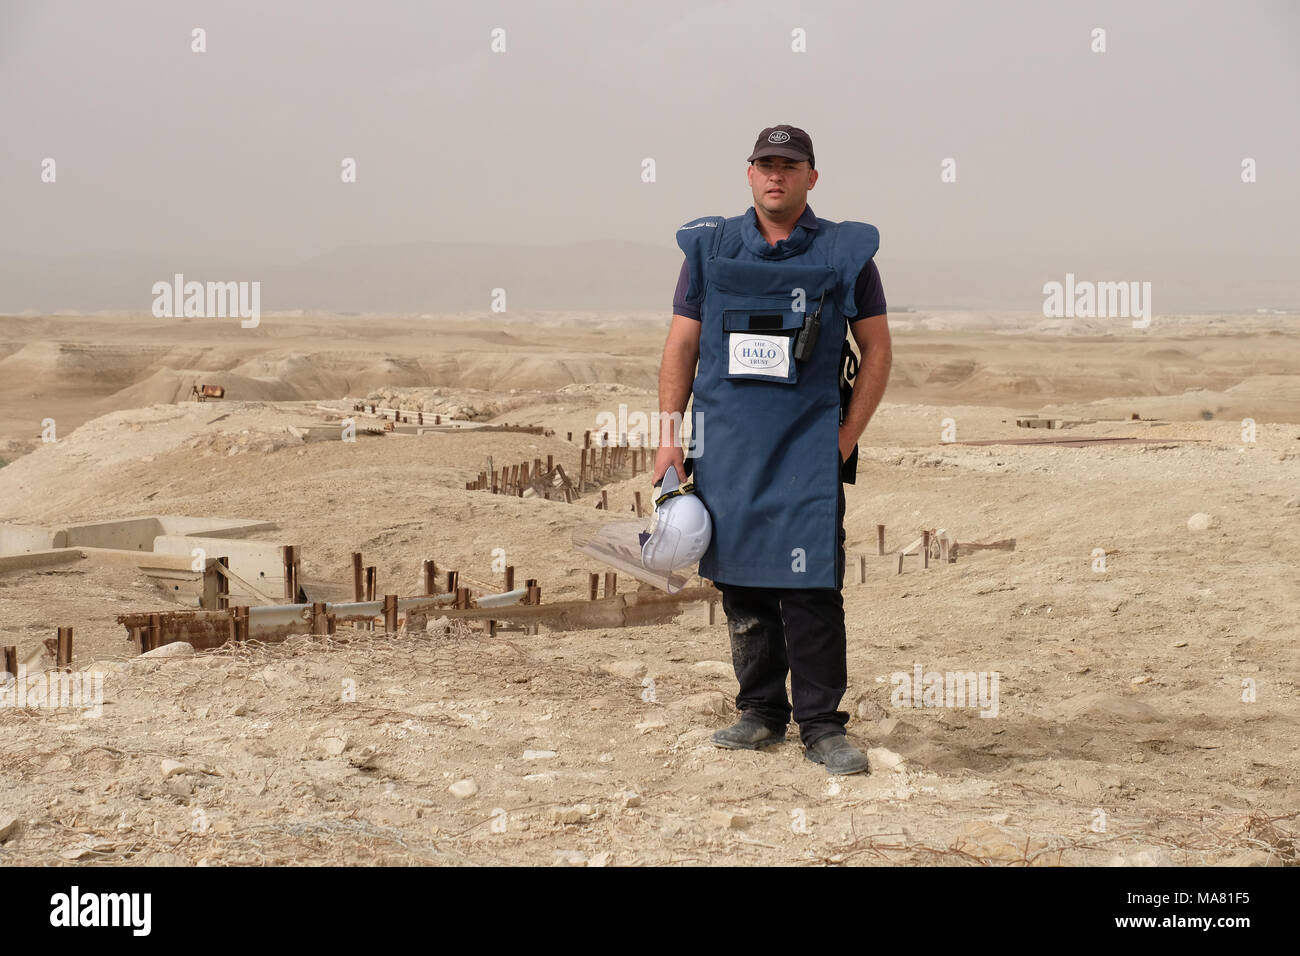 Qaser el Yahud, Israel 29th March 2018. Operations and Logistics Officer of HALO Trust group Hagai Golibrozky stands over a deserted military position in 'The land of Monasteries' area near the baptismal site Qaser el Yahud traditional site of the baptism of Jesus by John the Baptist in the Jordan River Valley region of West Bank, Israel. The area started to be cleared of some 4,000 landmines from the 1967 war and its aftermath by HALO Trust, a Scottish demining group that operates in 19 places around the world. Stock Photo